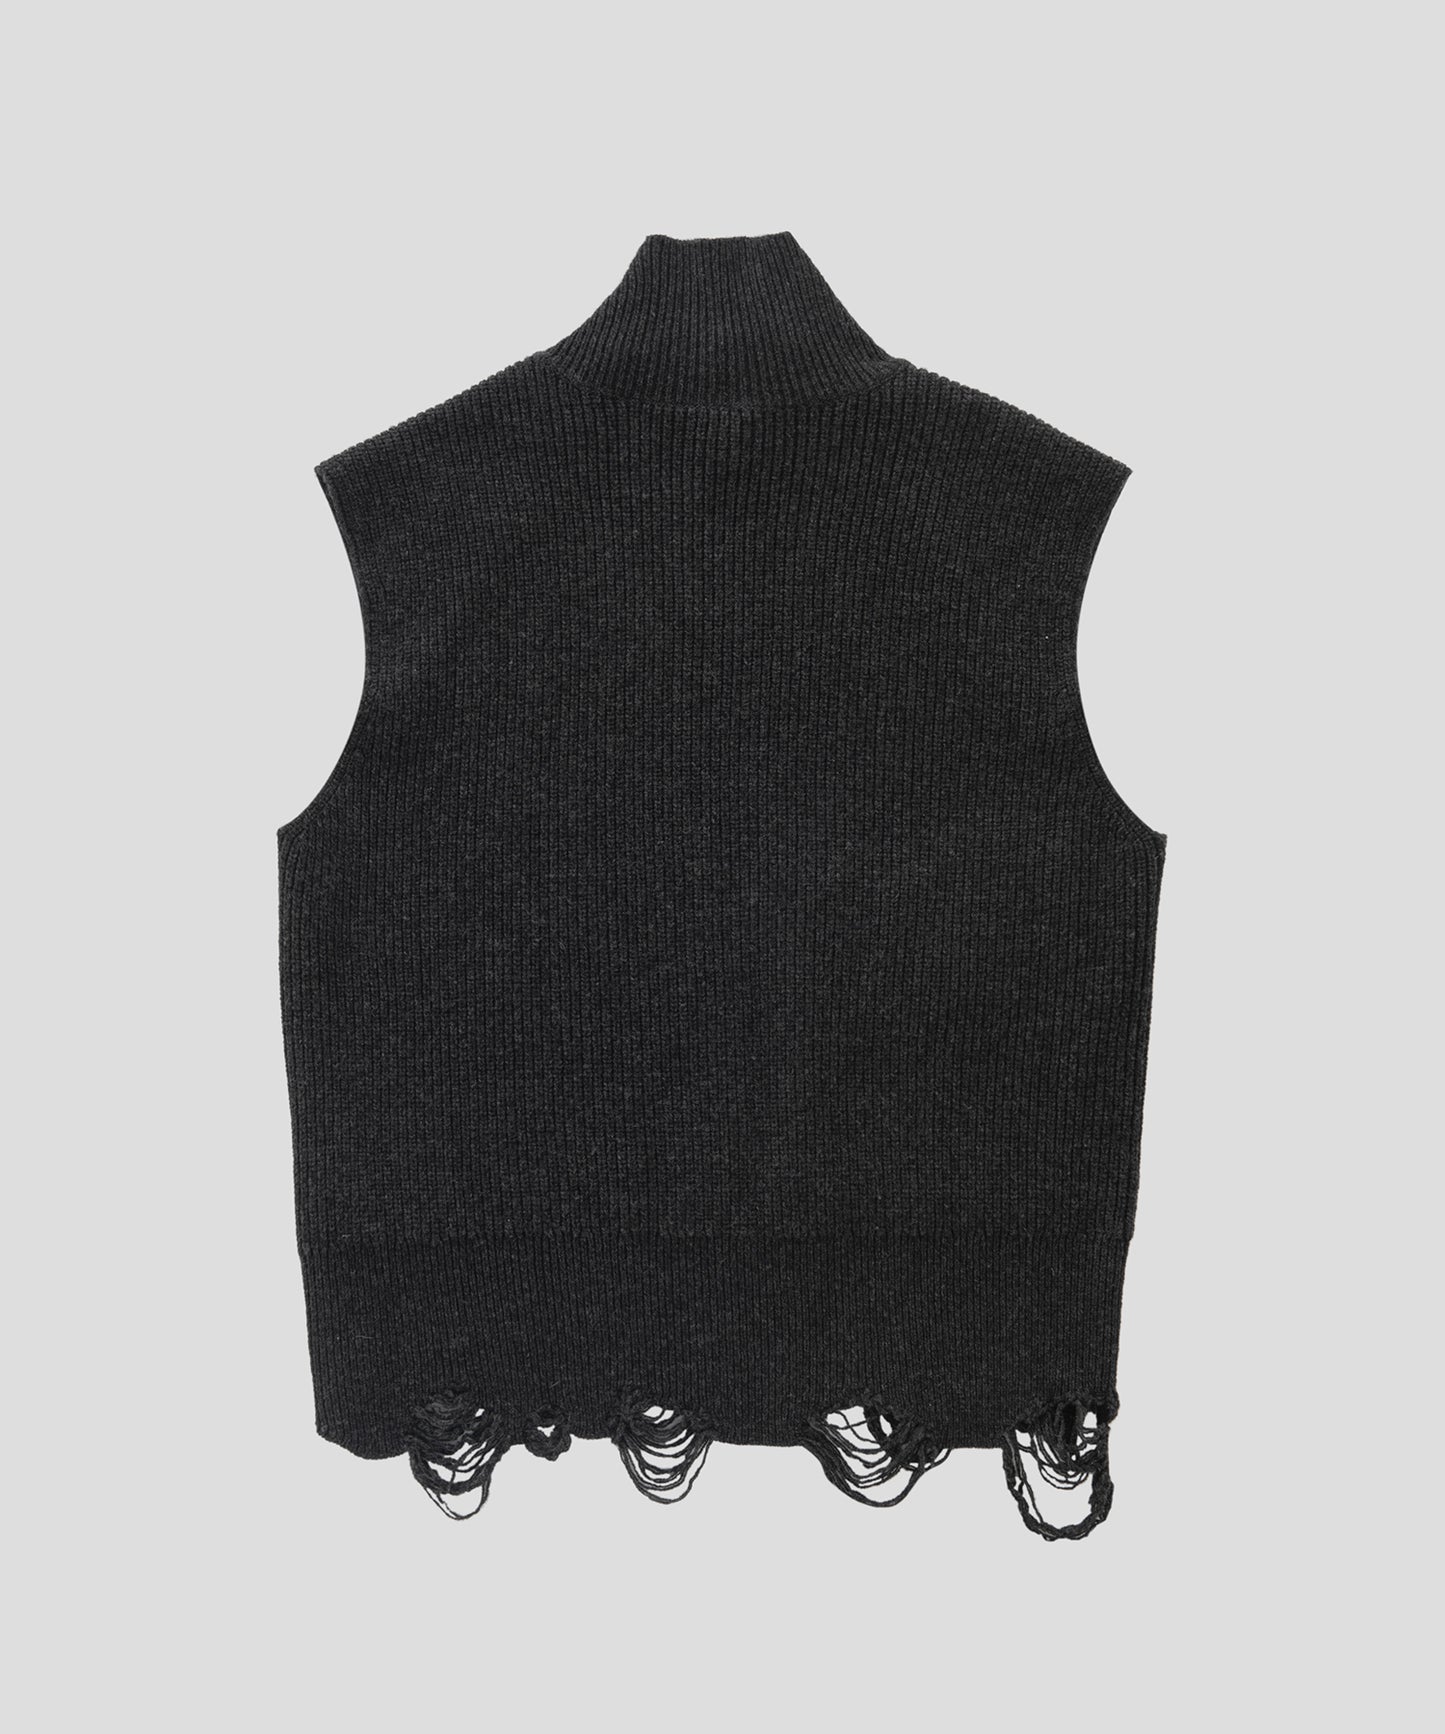 HOME Distressed Oversized High-neck Wool Sweater Vest